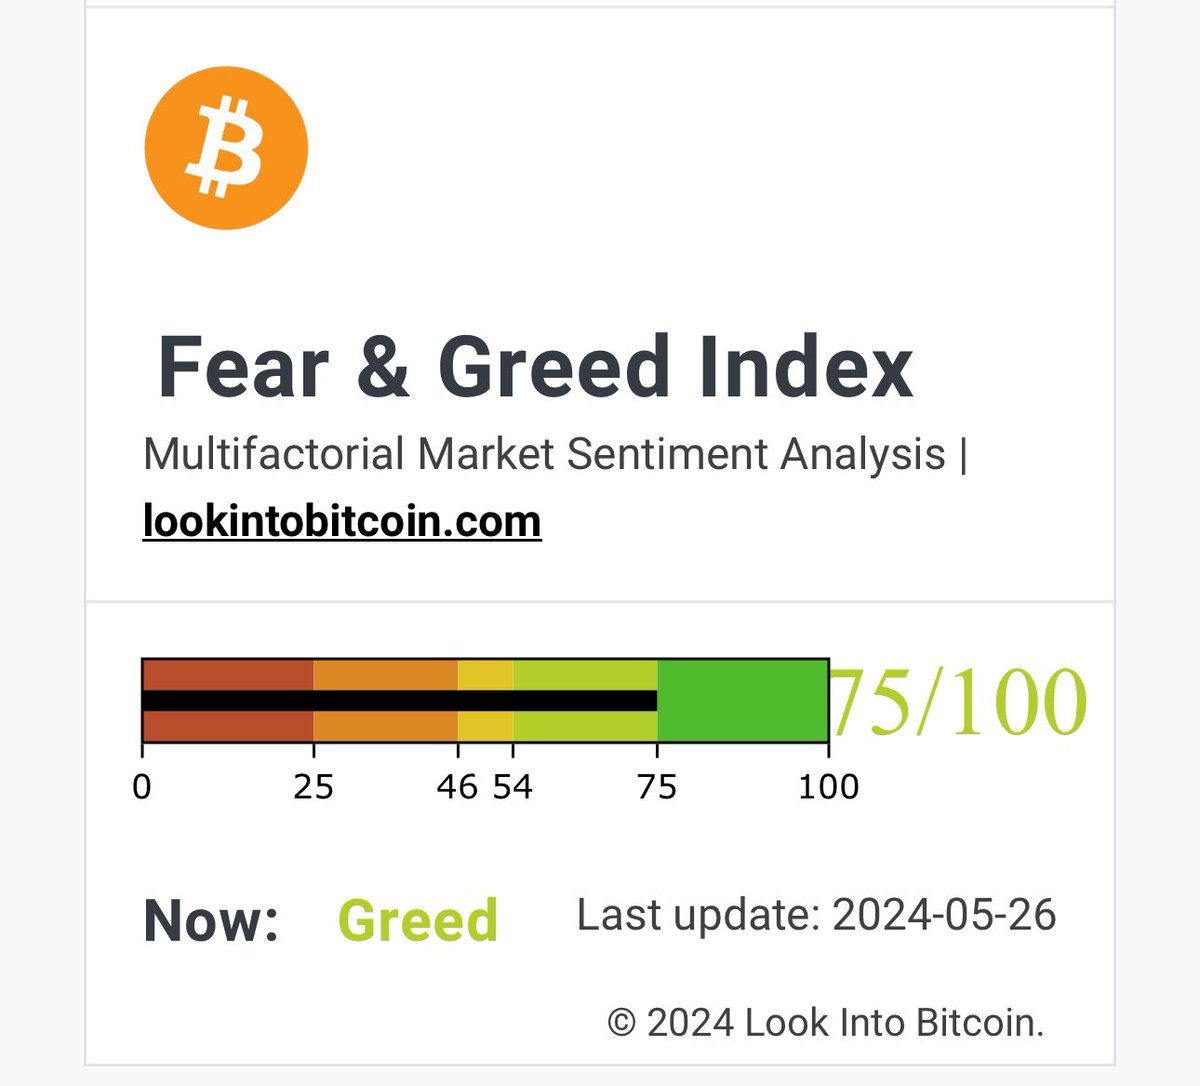 Now GREED 💚 Bitcoin is a HOPE. #BTC